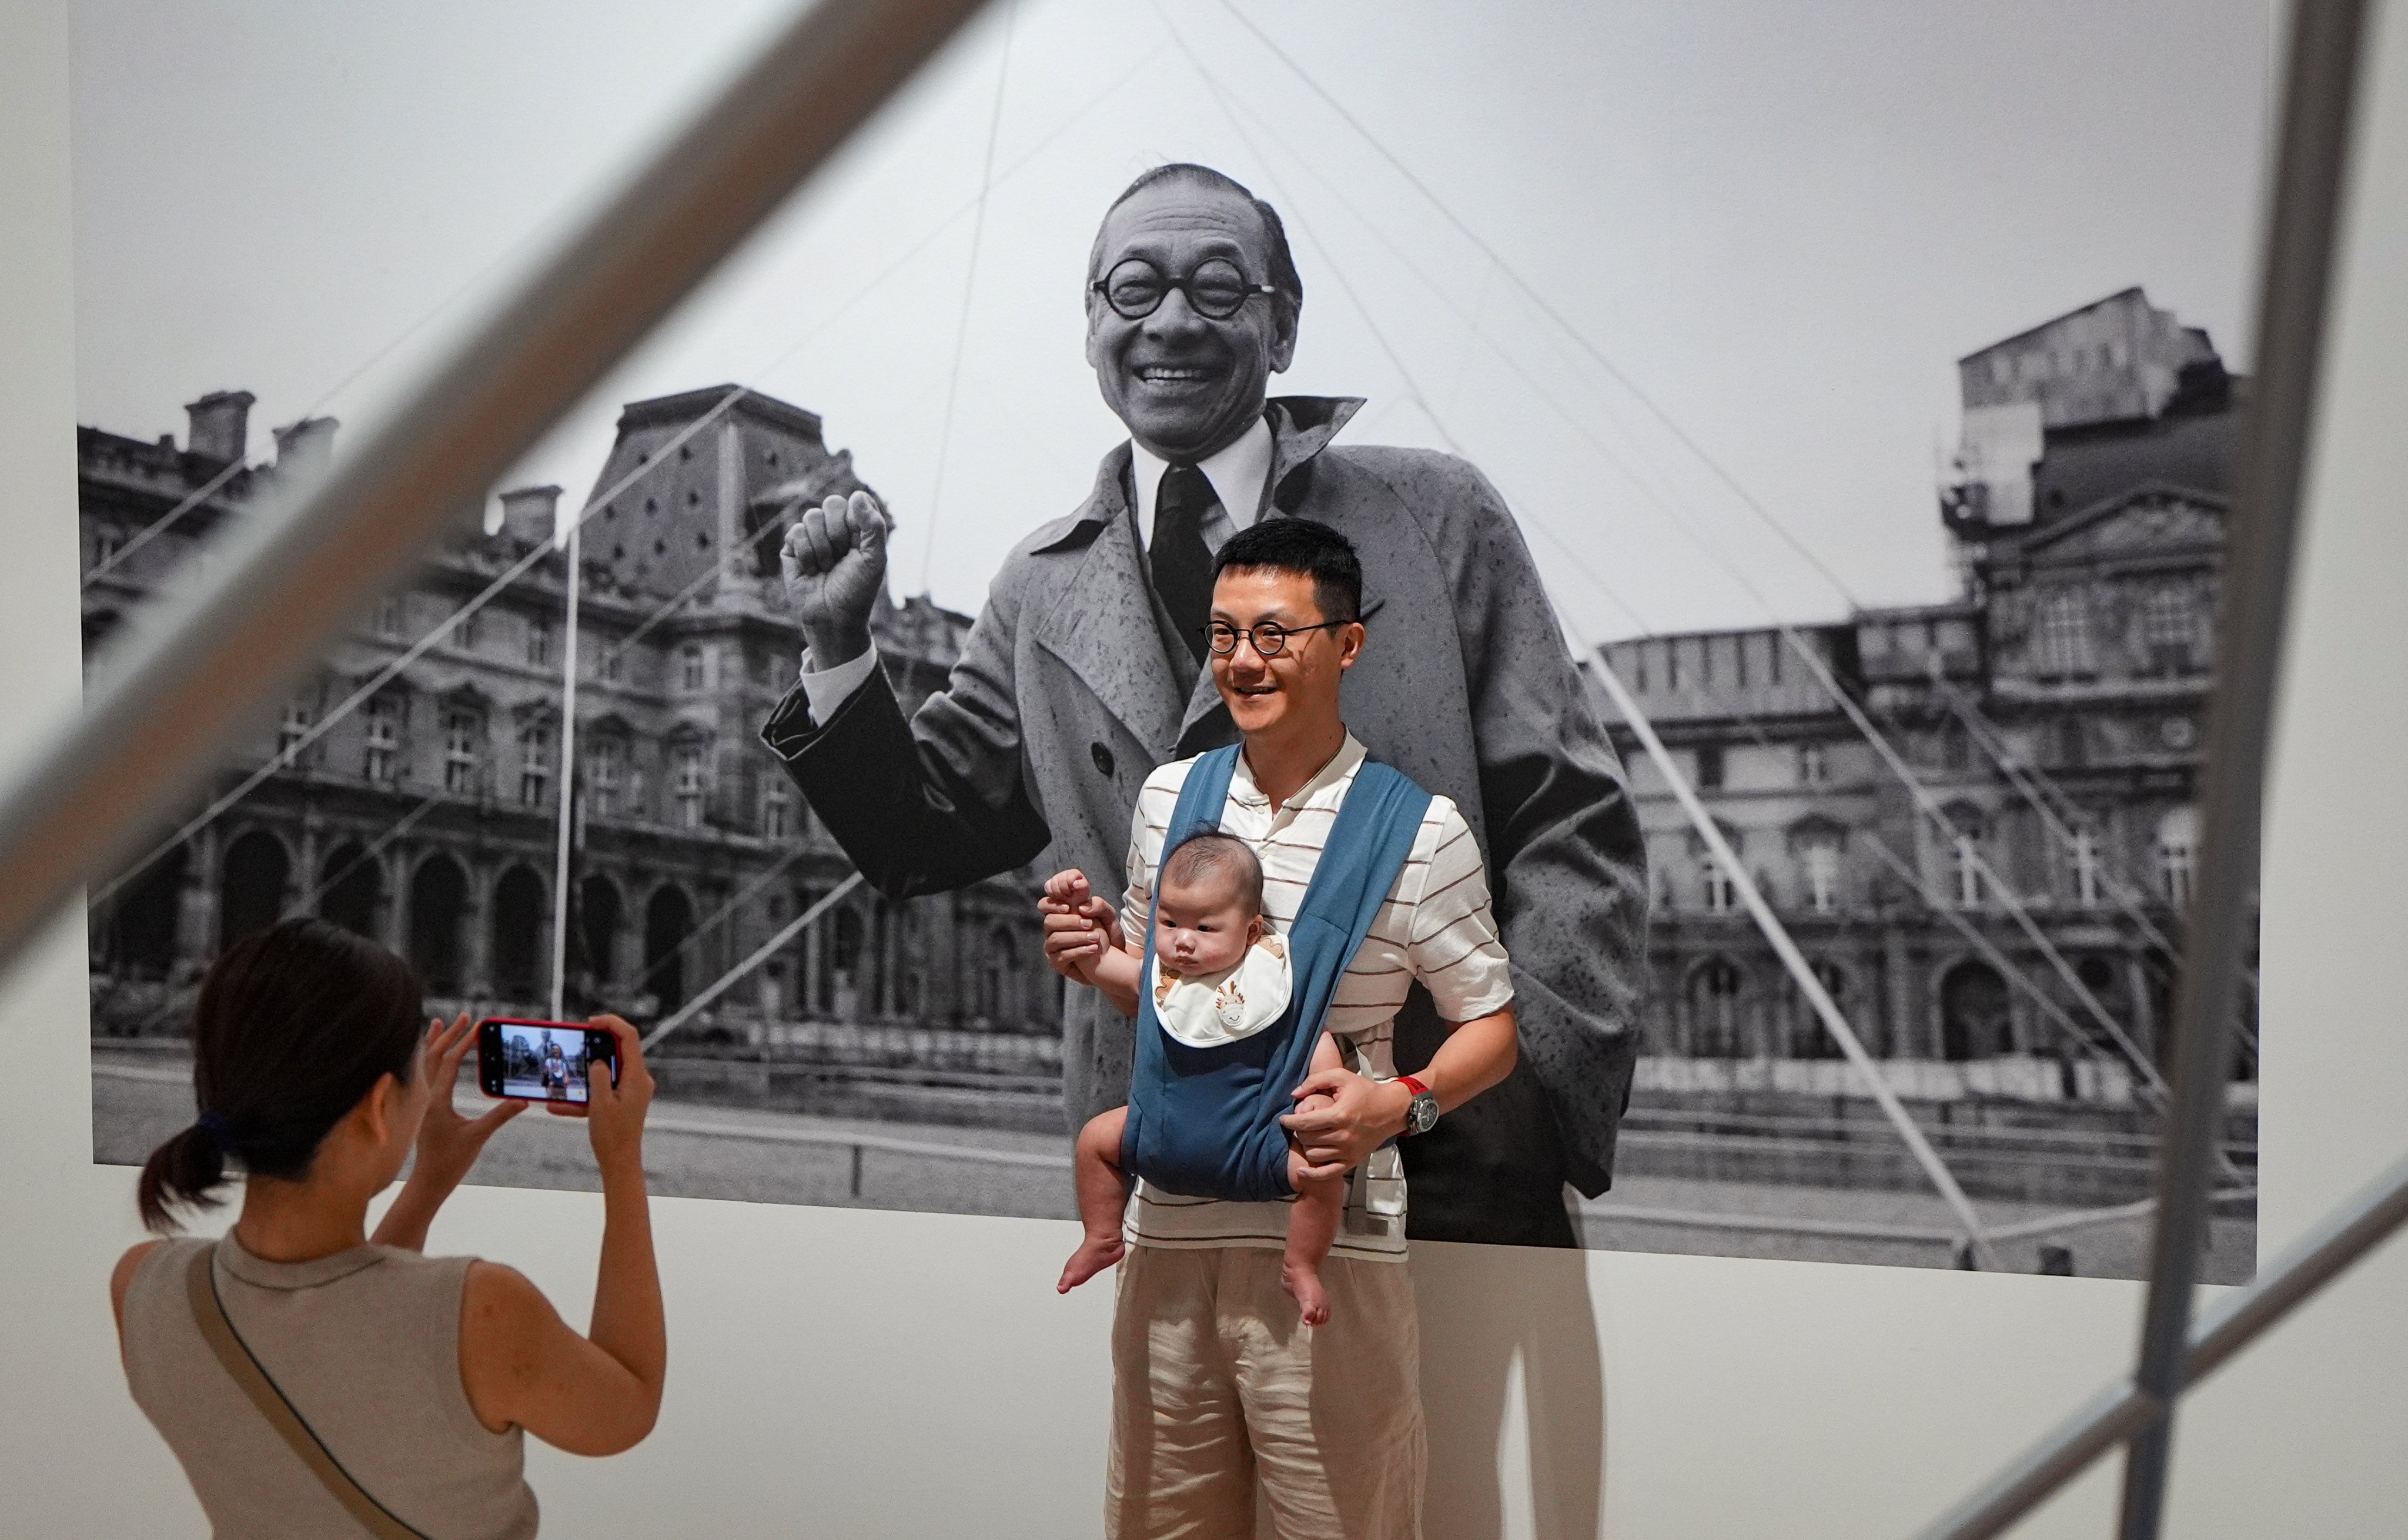 A family poses for photos at the M+ exhibition of the life and works of I. M. Pei, on June 29. The celebrated architect’s convictions are needed more than ever, if we are to find optimism in these divided times. Photo: Eugene Lee